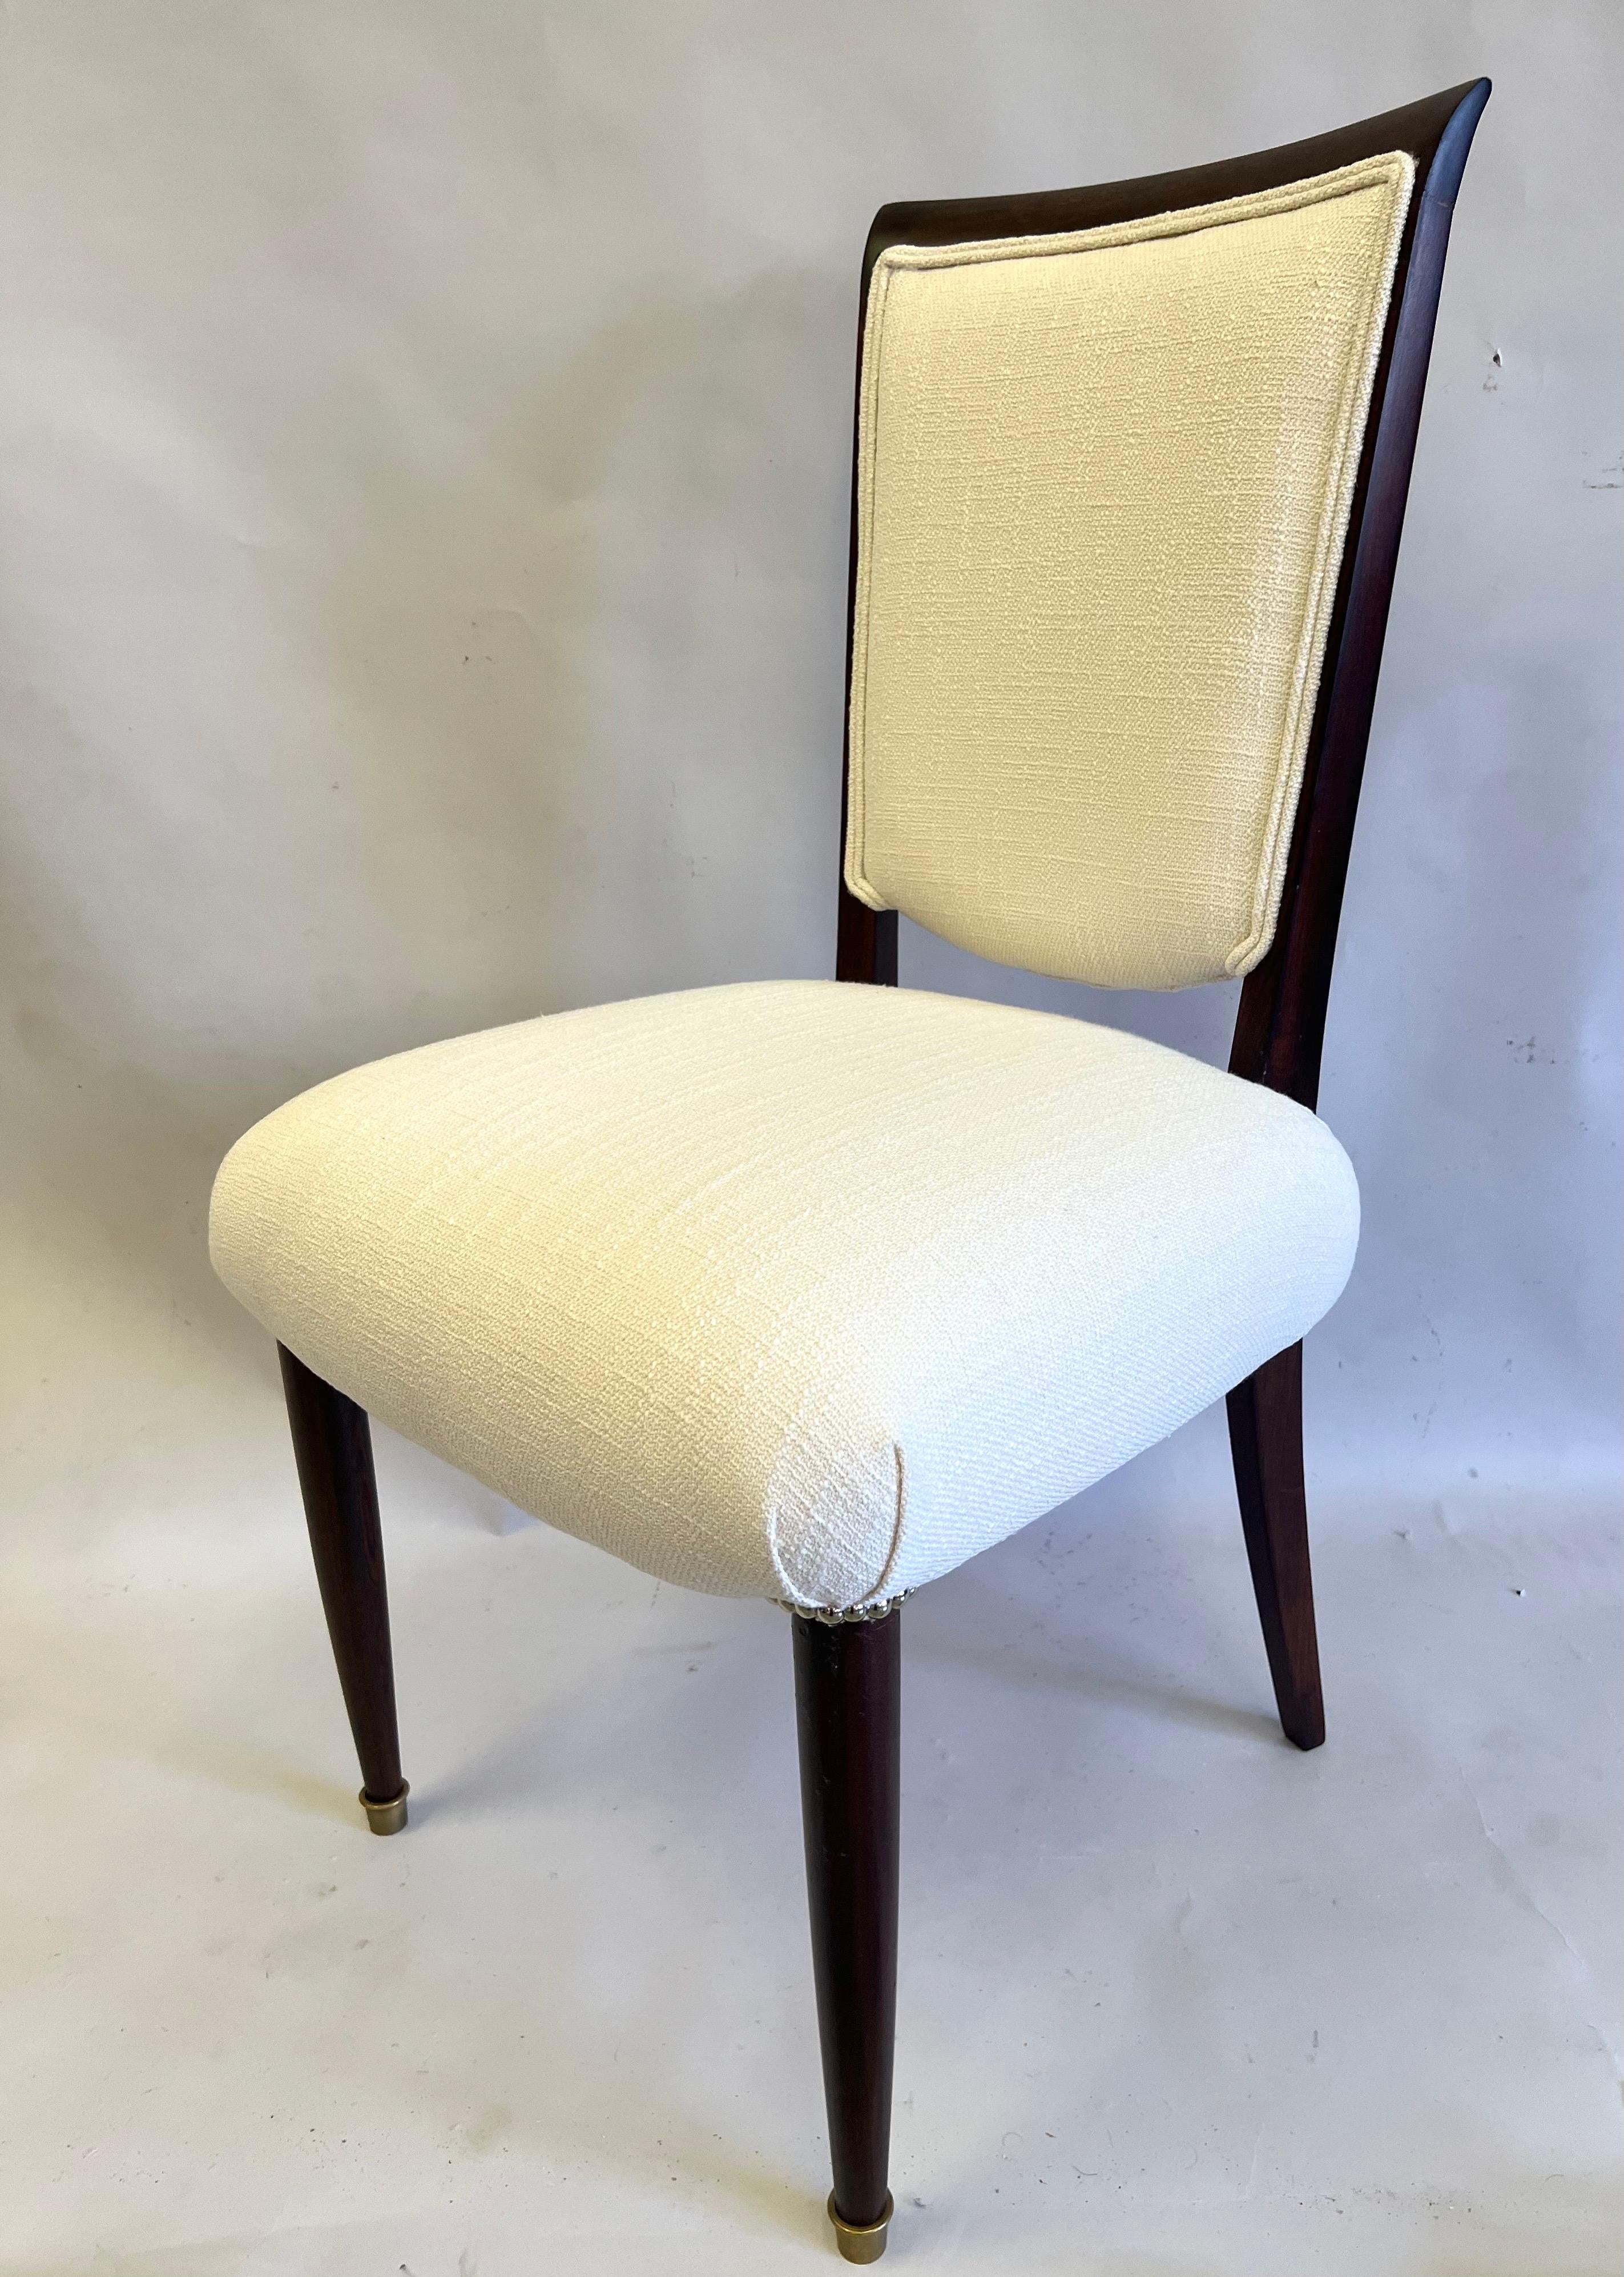 An Important SET of 8 French Art Deco / Midcentury Modern Dining Room Chairs signed by the French master designer and decorator, Jules Leleu. This rare set of chairs expresses the height of elegance and good taste which Jules Leleu was known for.